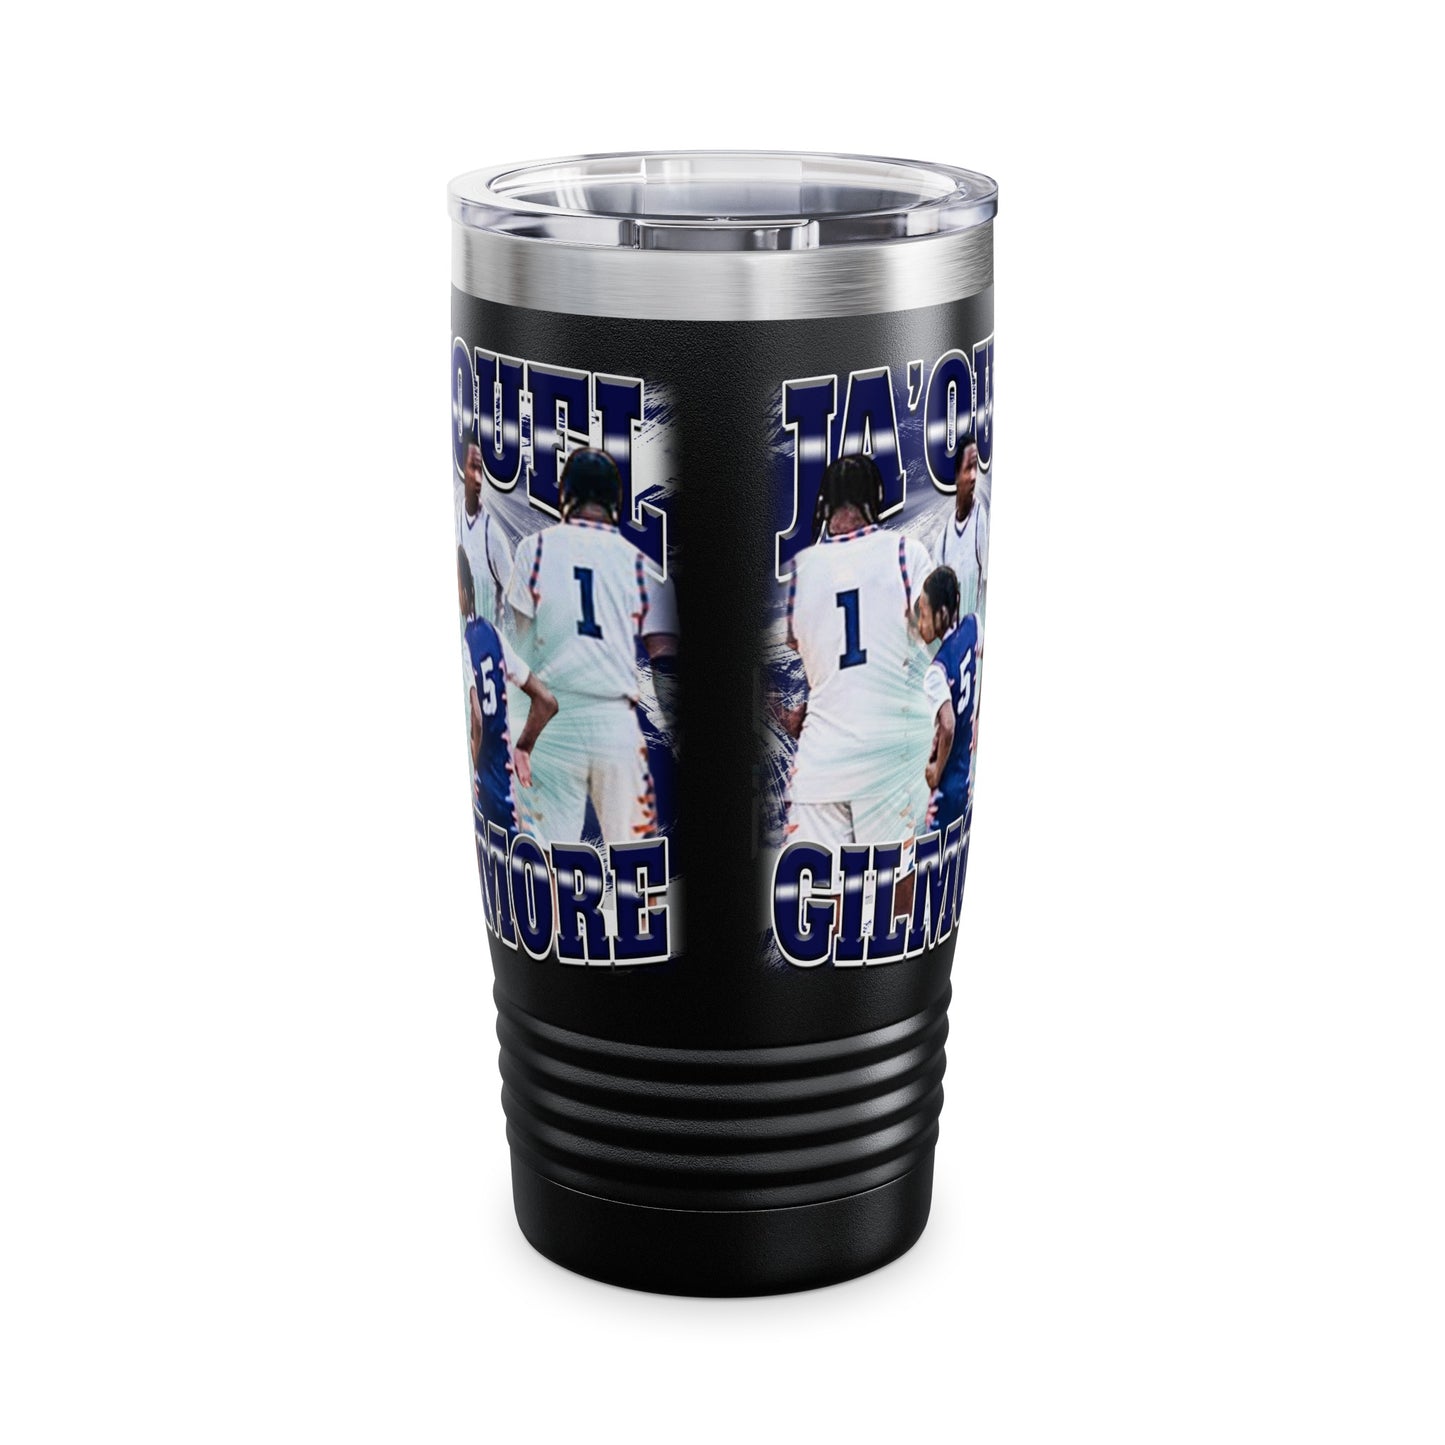 Ja'Quel Gilmore Stainless Steal Tumbler